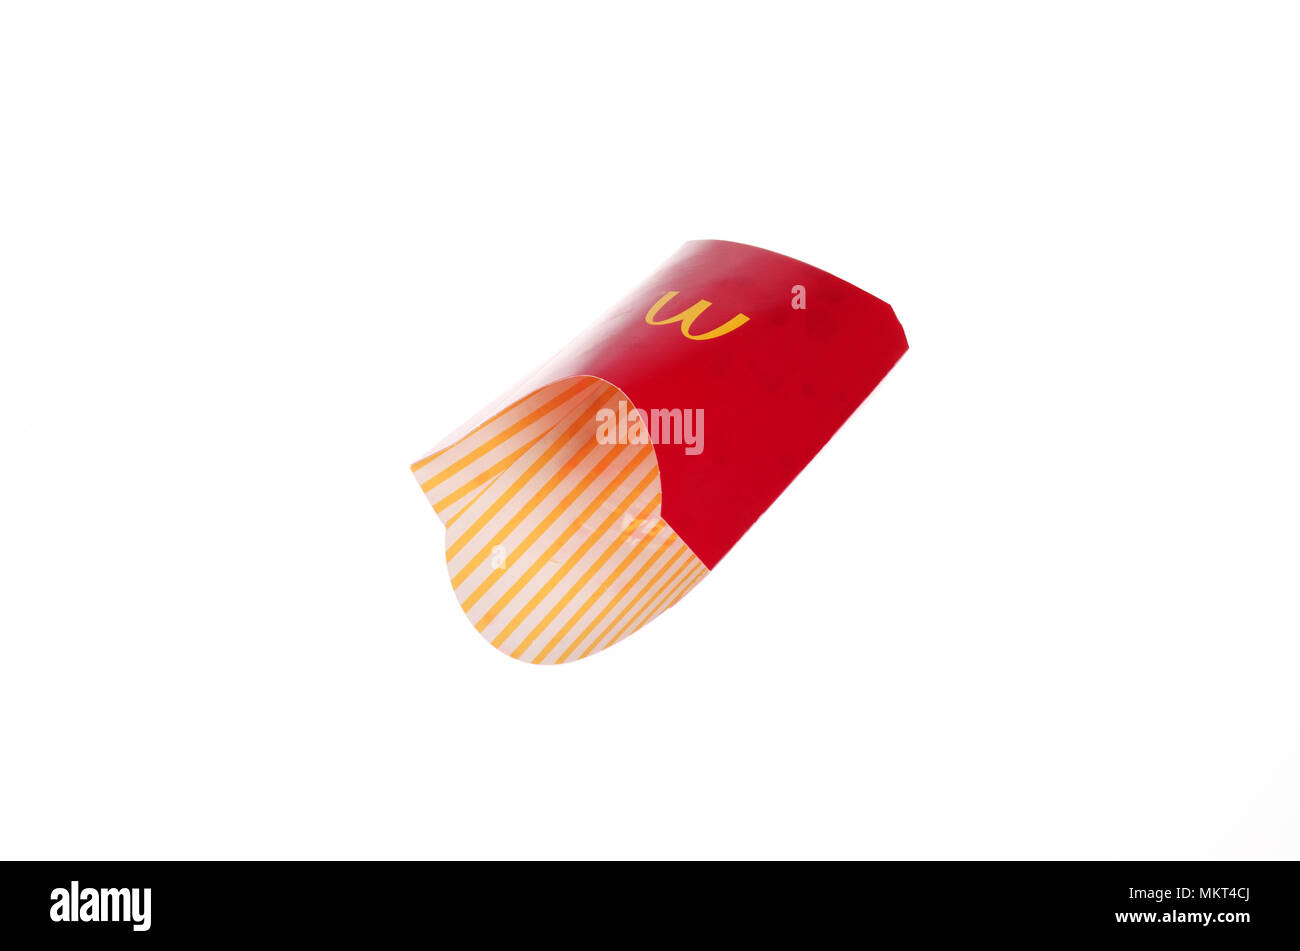 Empty McDonalds french fries container on white background Stock Photo